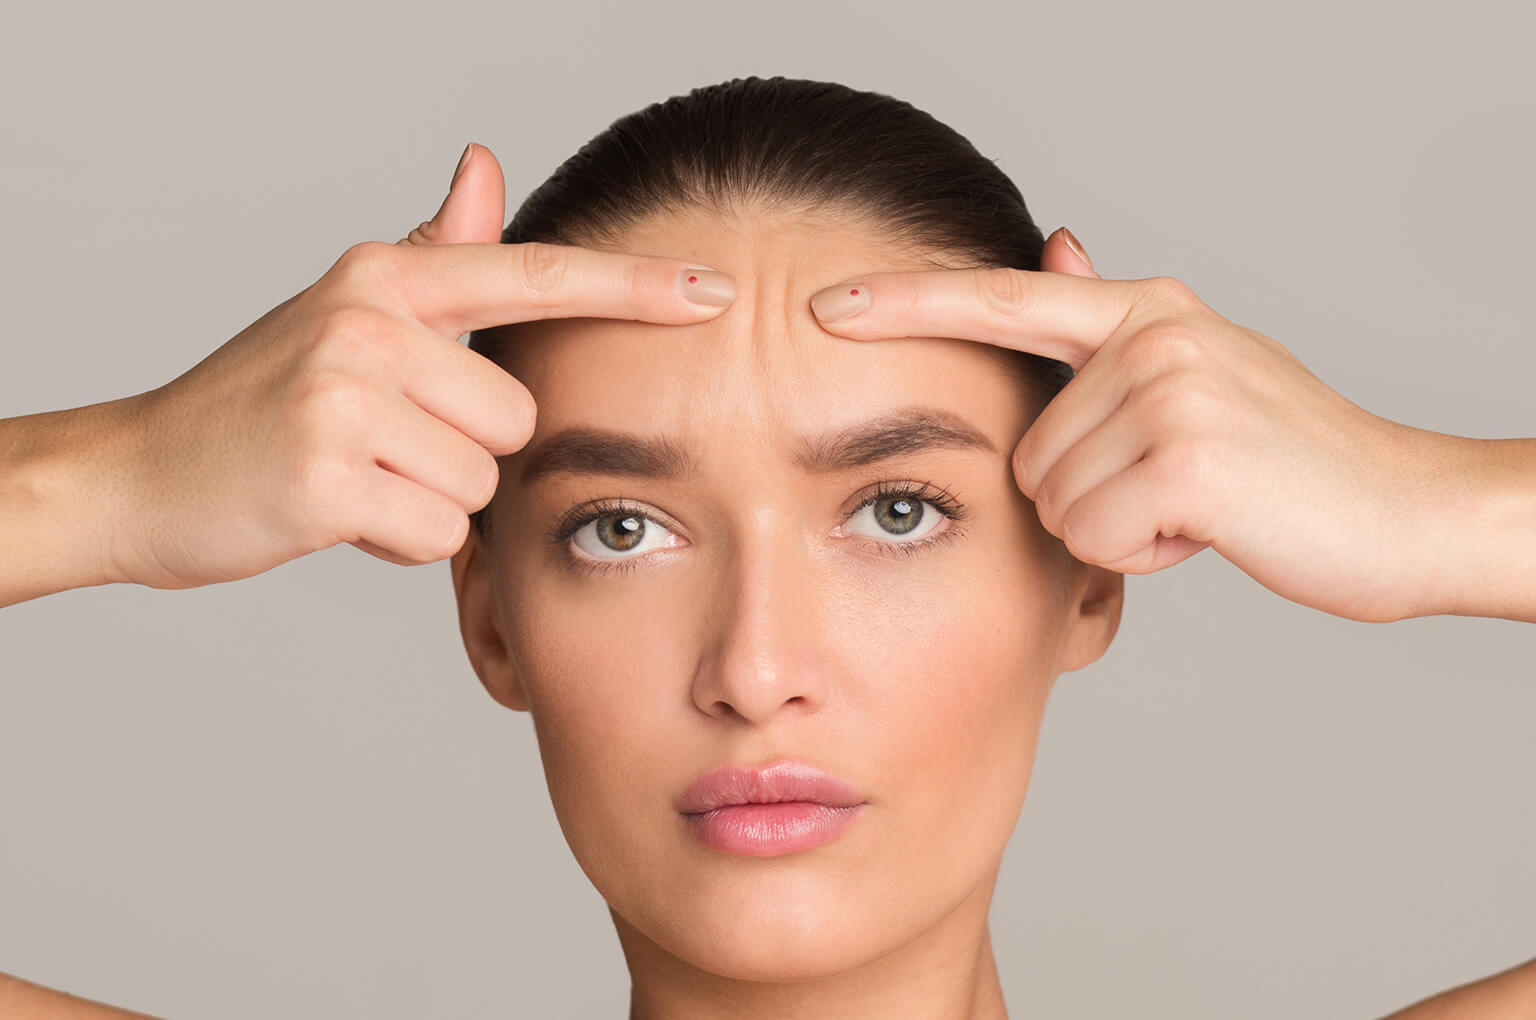 Using Botox for frown lines, glabellar lines, forehead folds, and crow’s feet